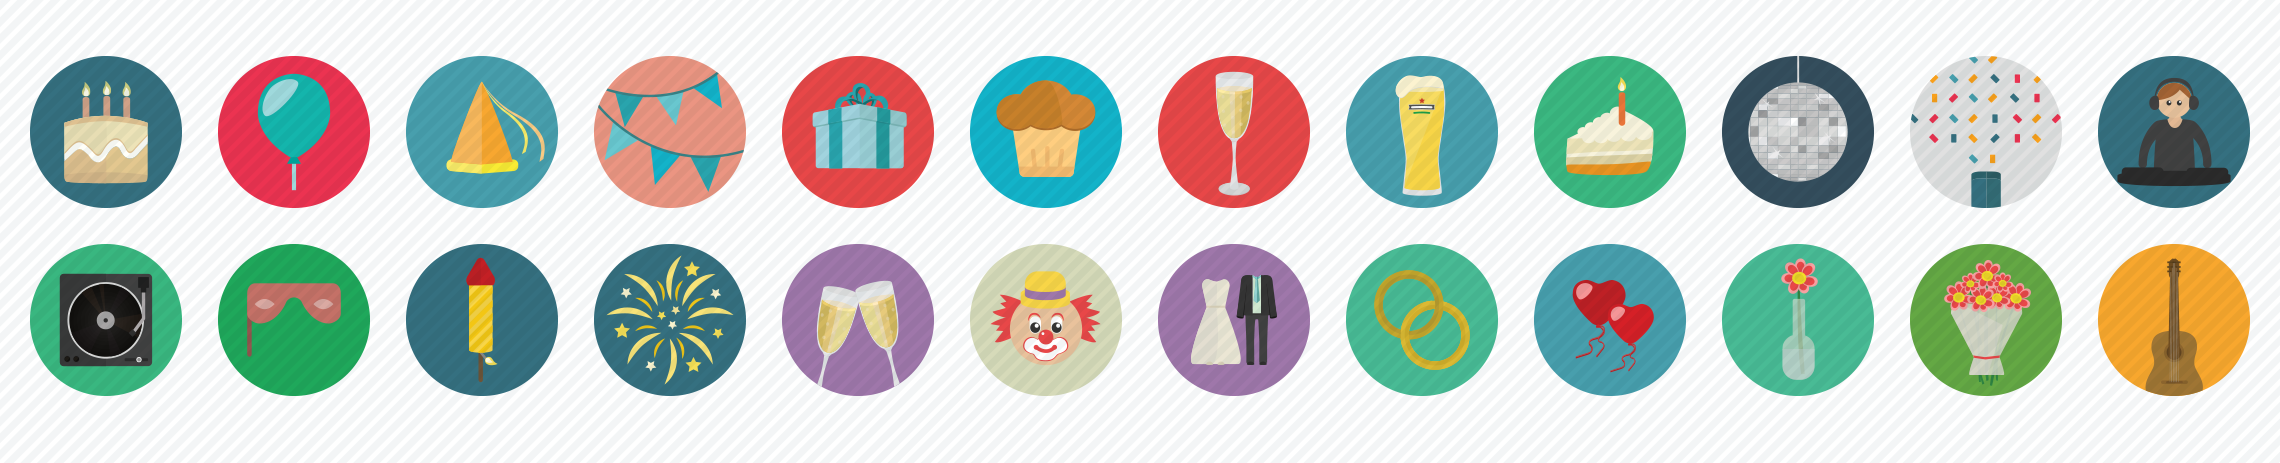 party-flat-icons-set1